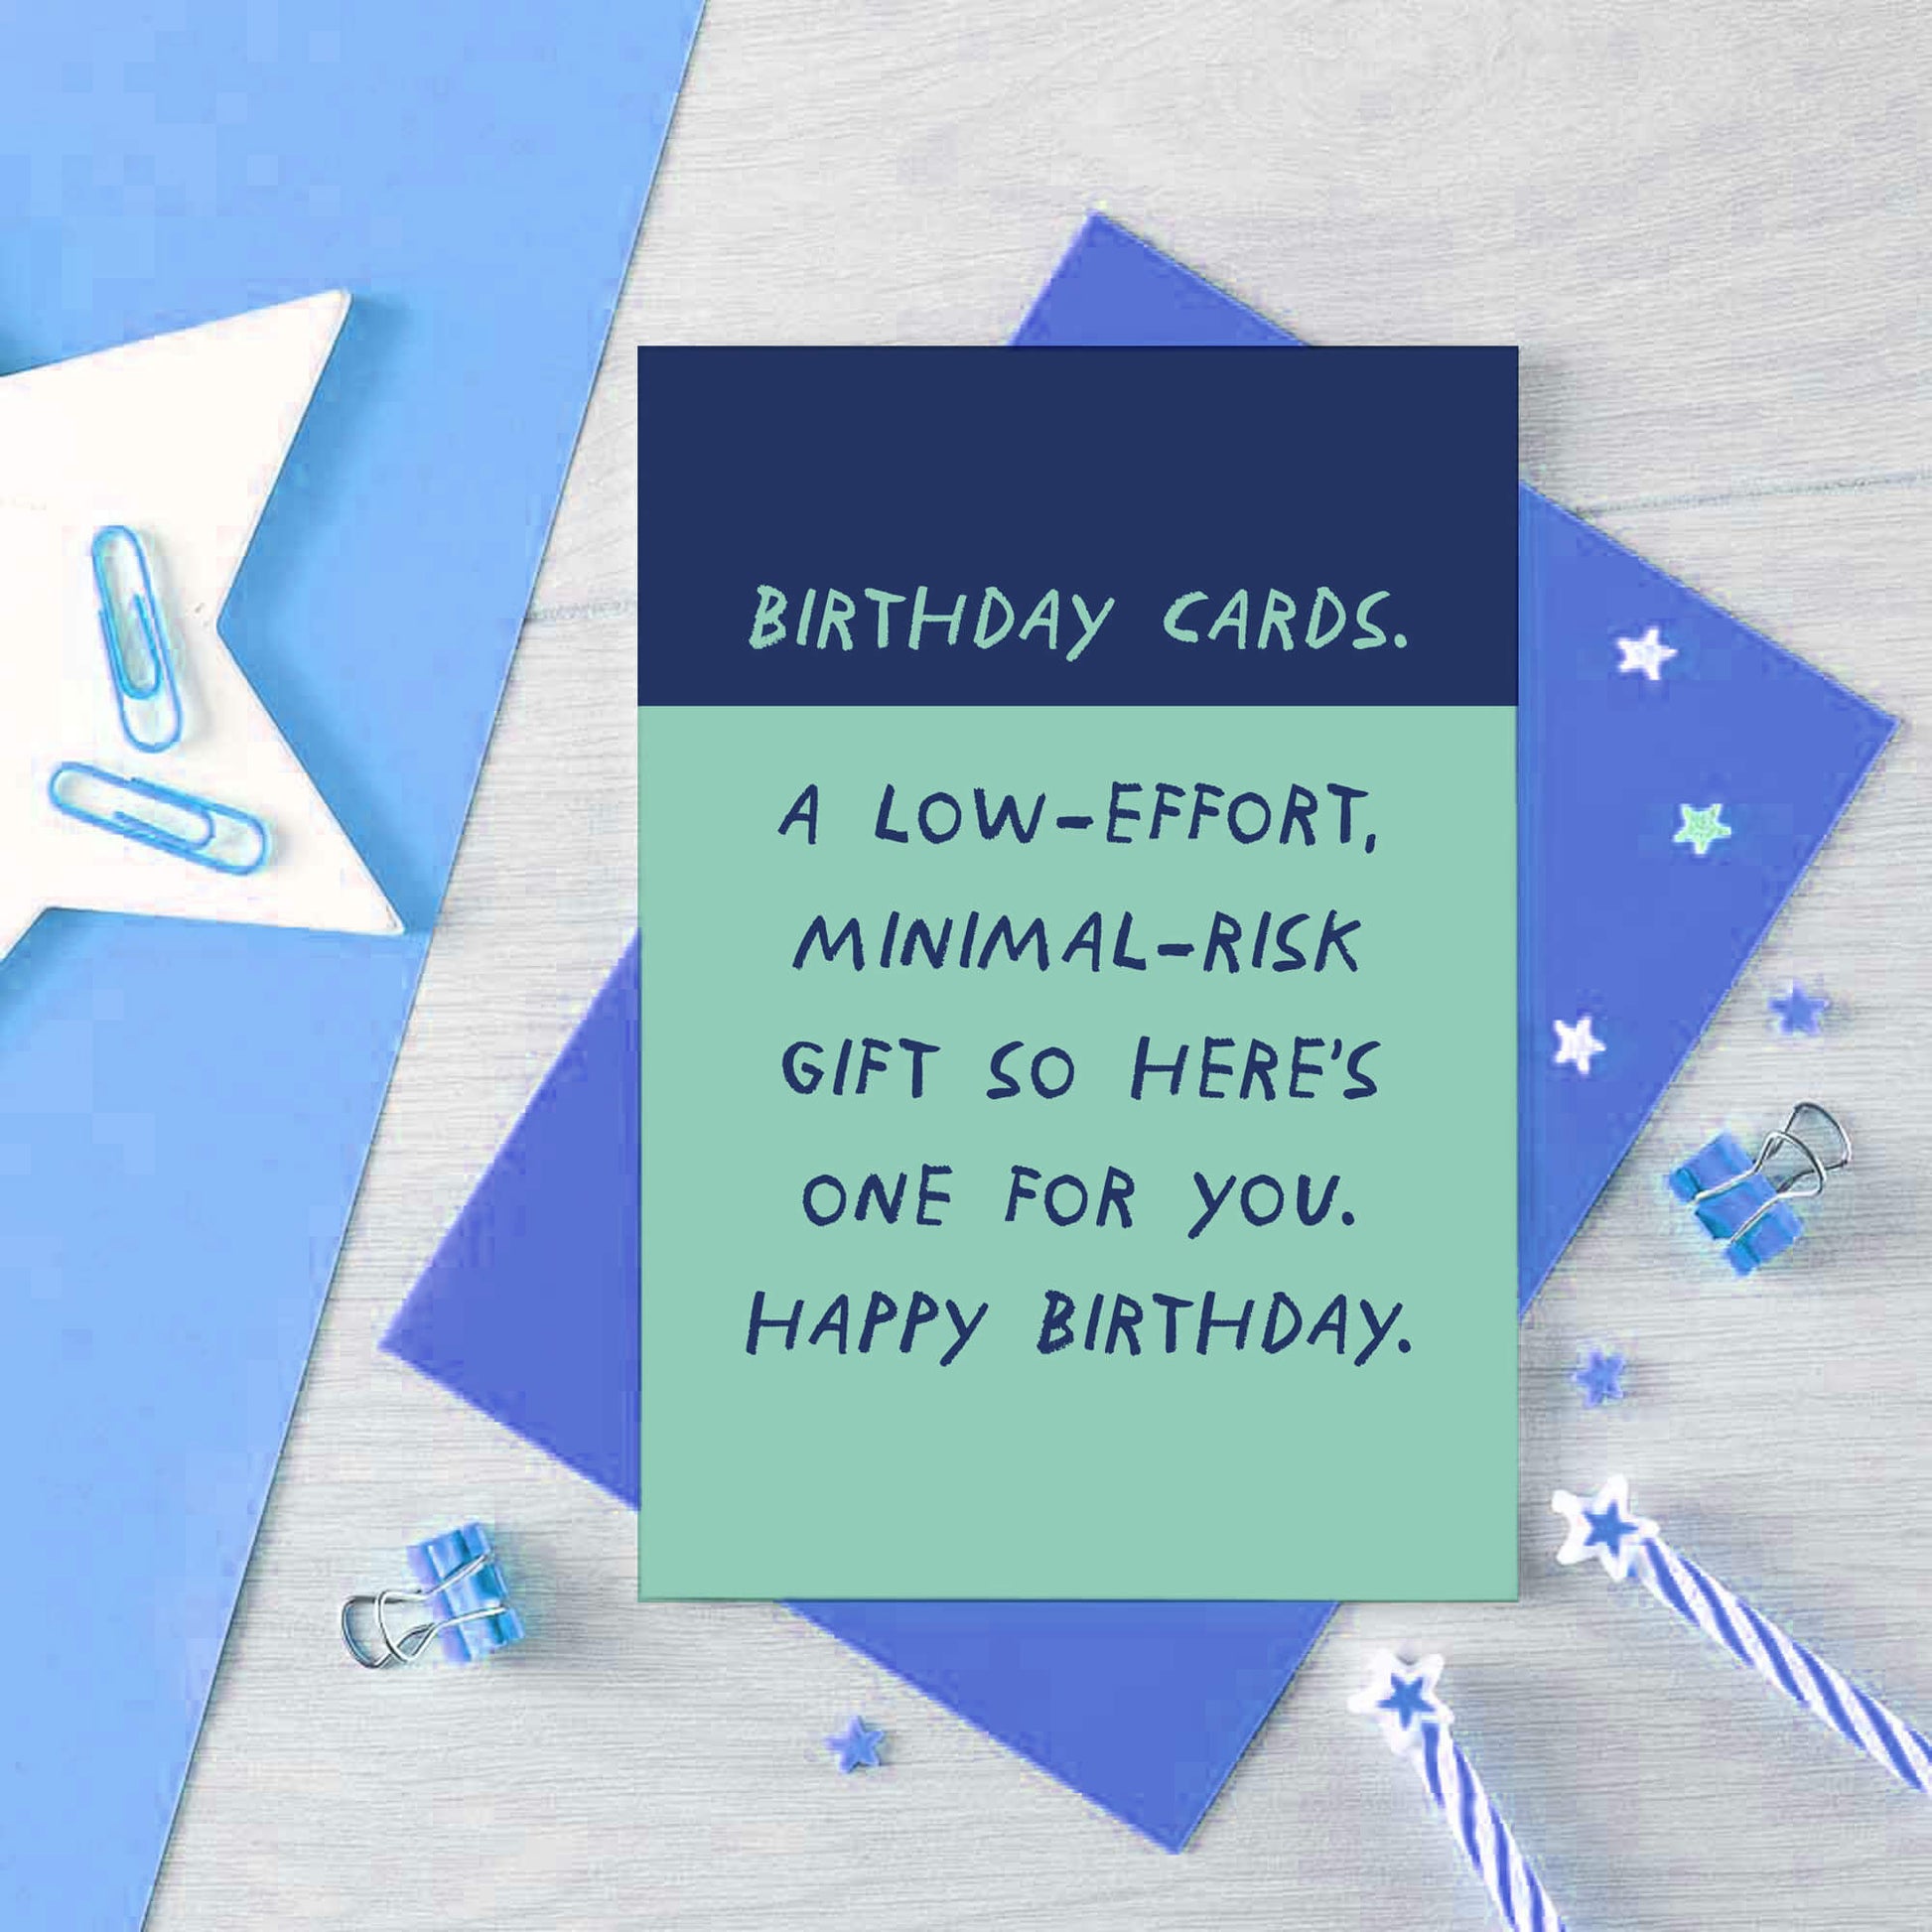 Birthday Card by SixElevenCreations. Reads Birthday Cards. A low-effort, minimal risk gift so here's one for you. Happy Birthday. Product Code SE2101A6